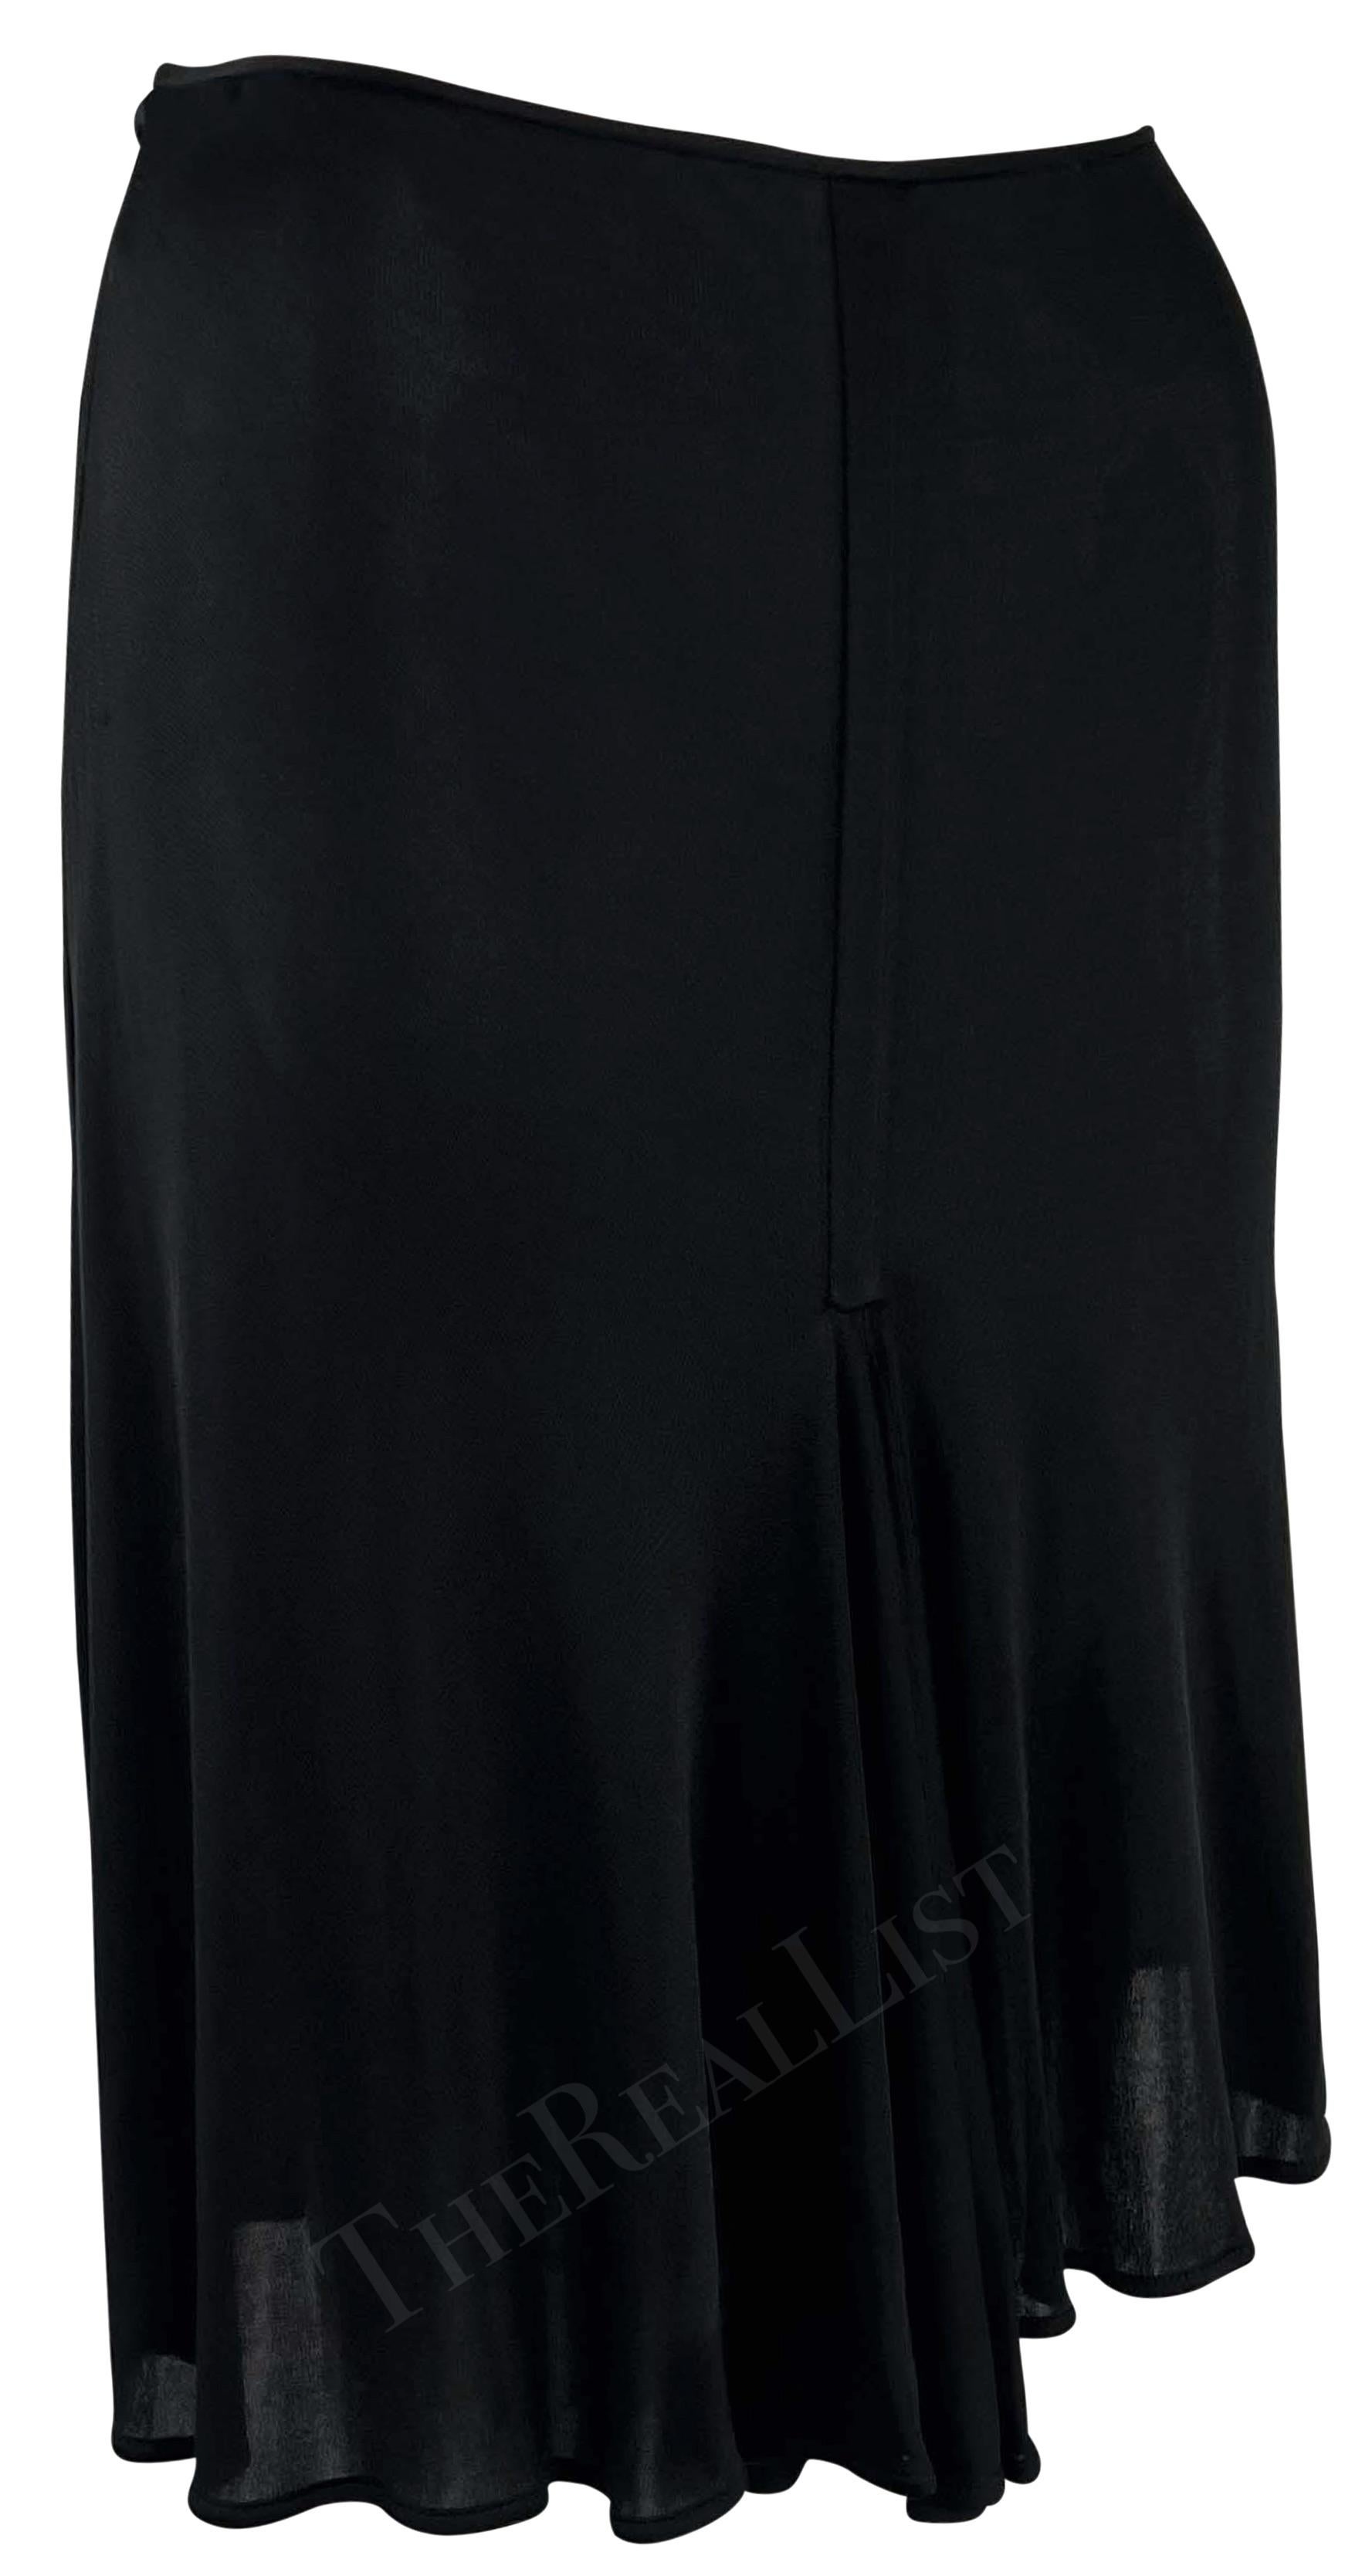 Women's S/S 2001 Gianni Versace by Donatella Black Ruched Sheer Bodycon Stretch Skirt For Sale